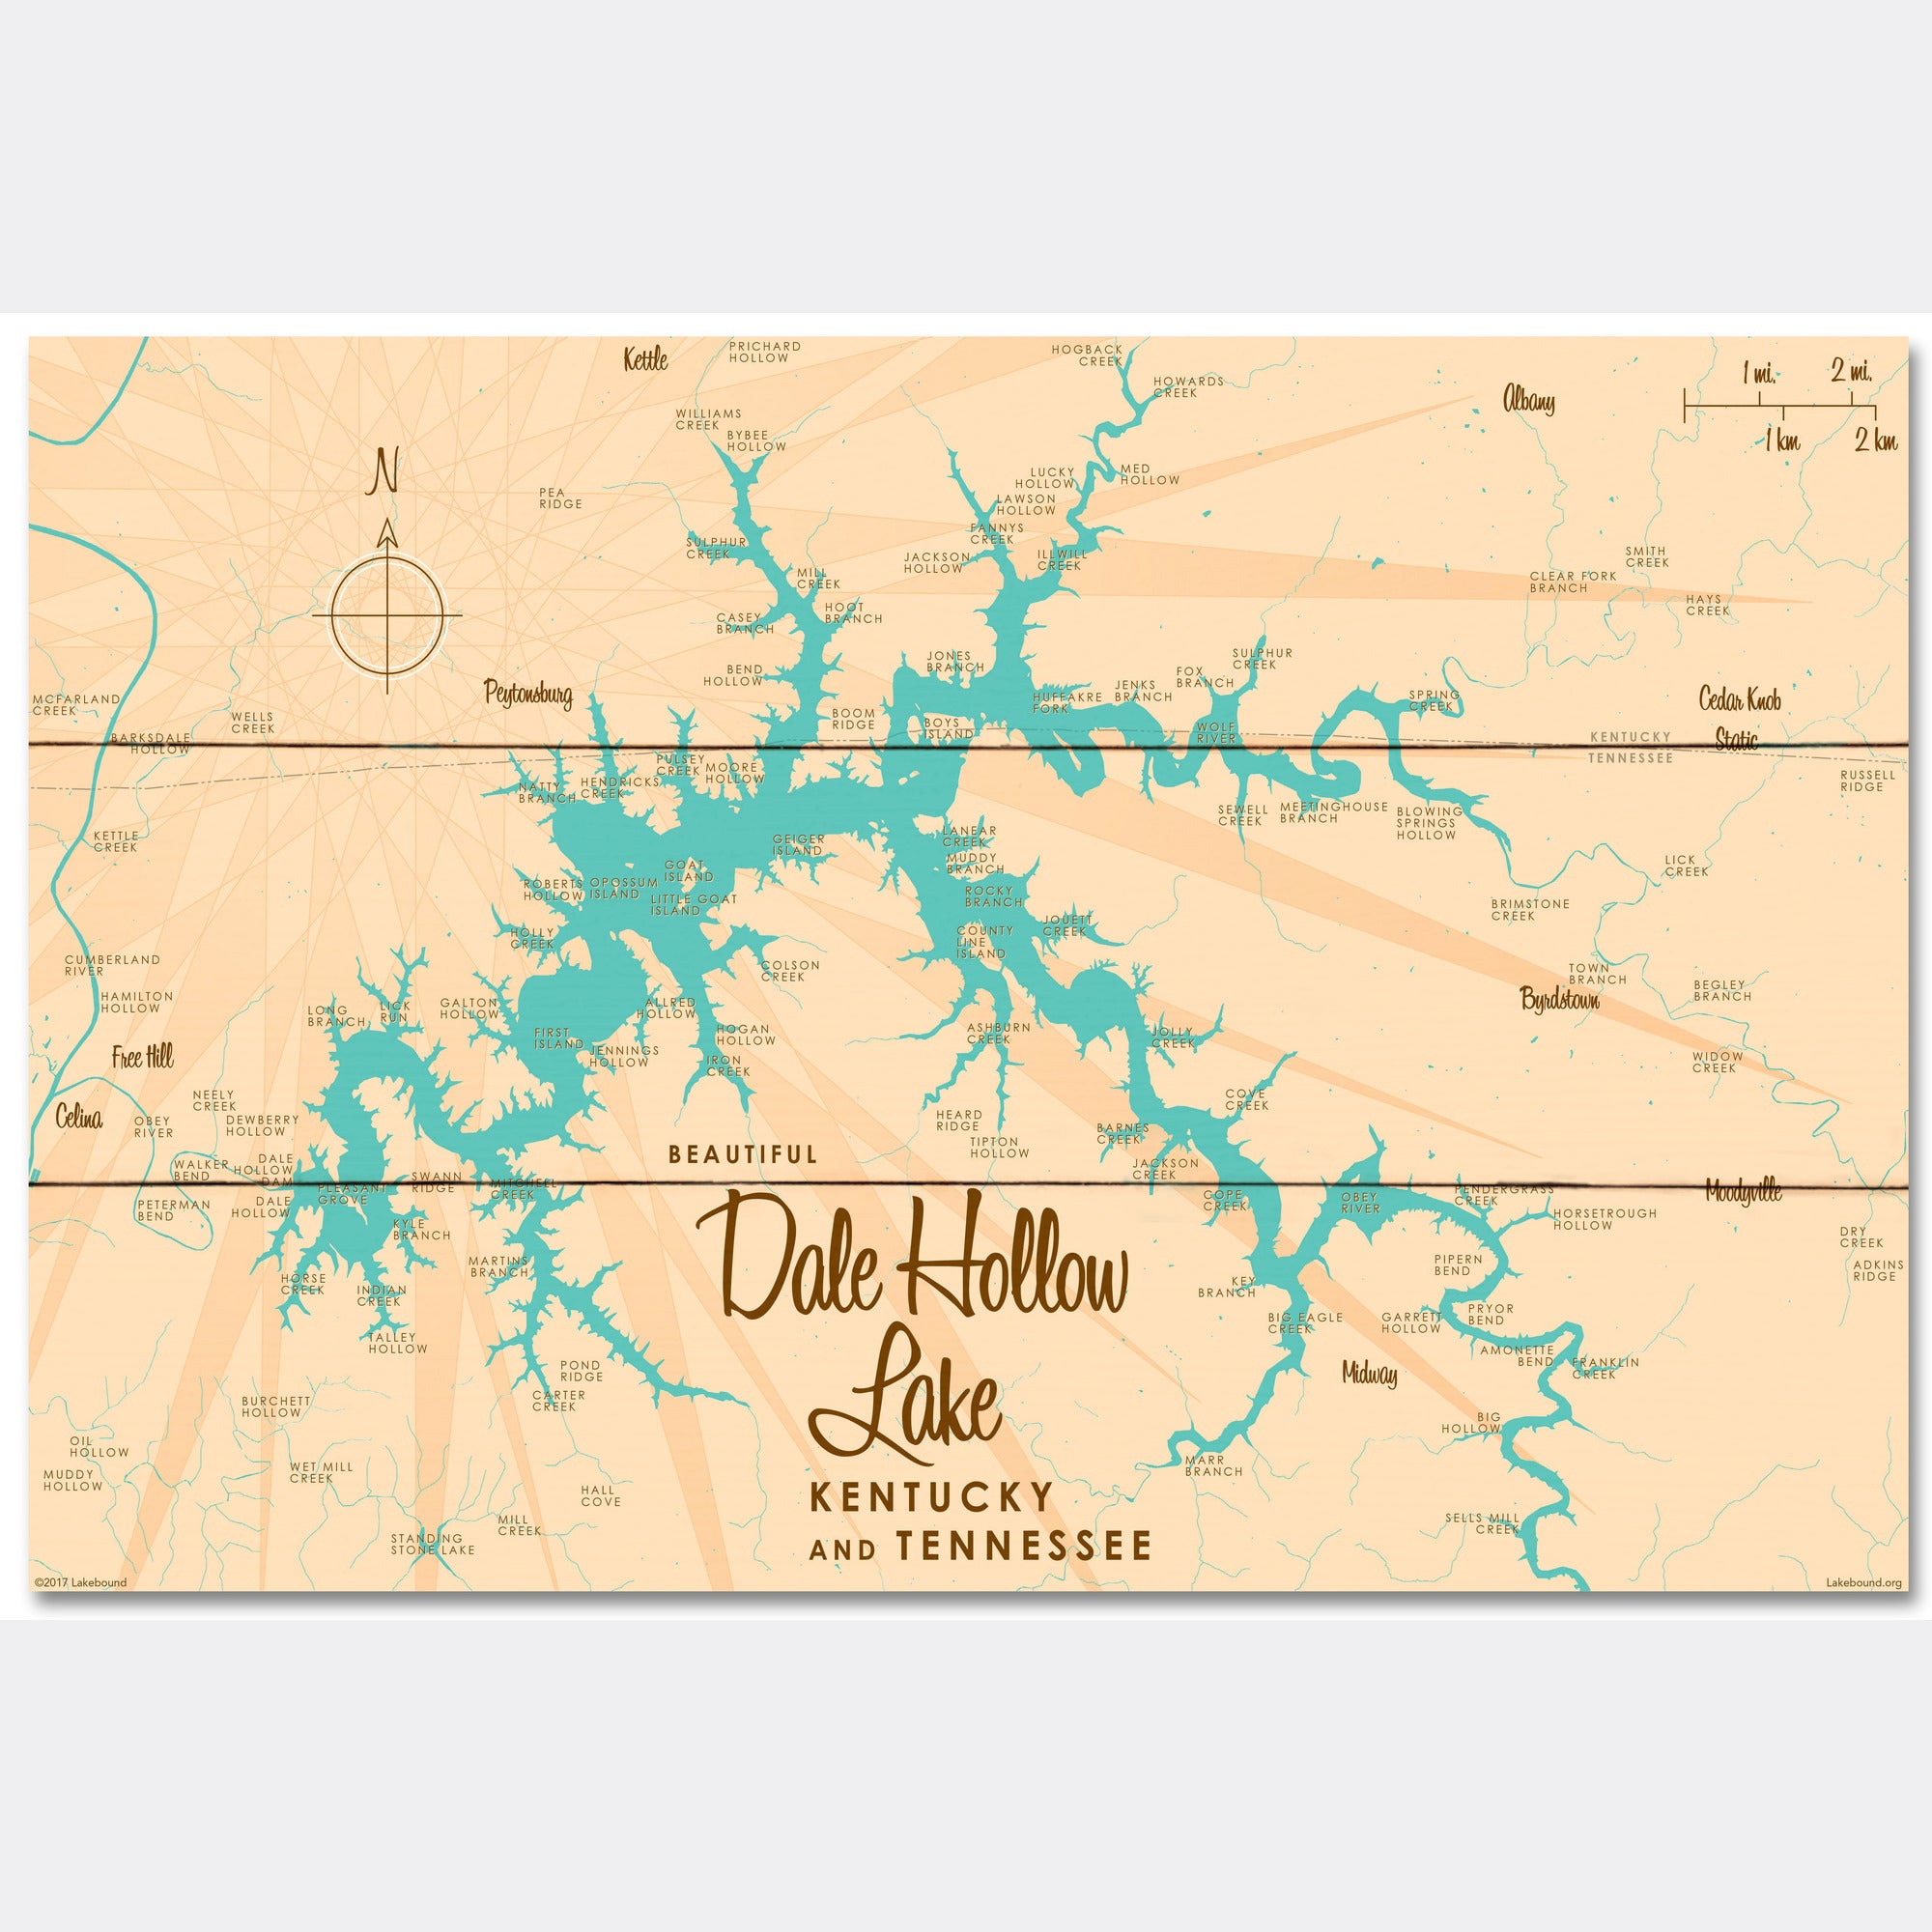 Dale Hollow Lake, Kentucky & Tennessee, Wood Sign Map Art